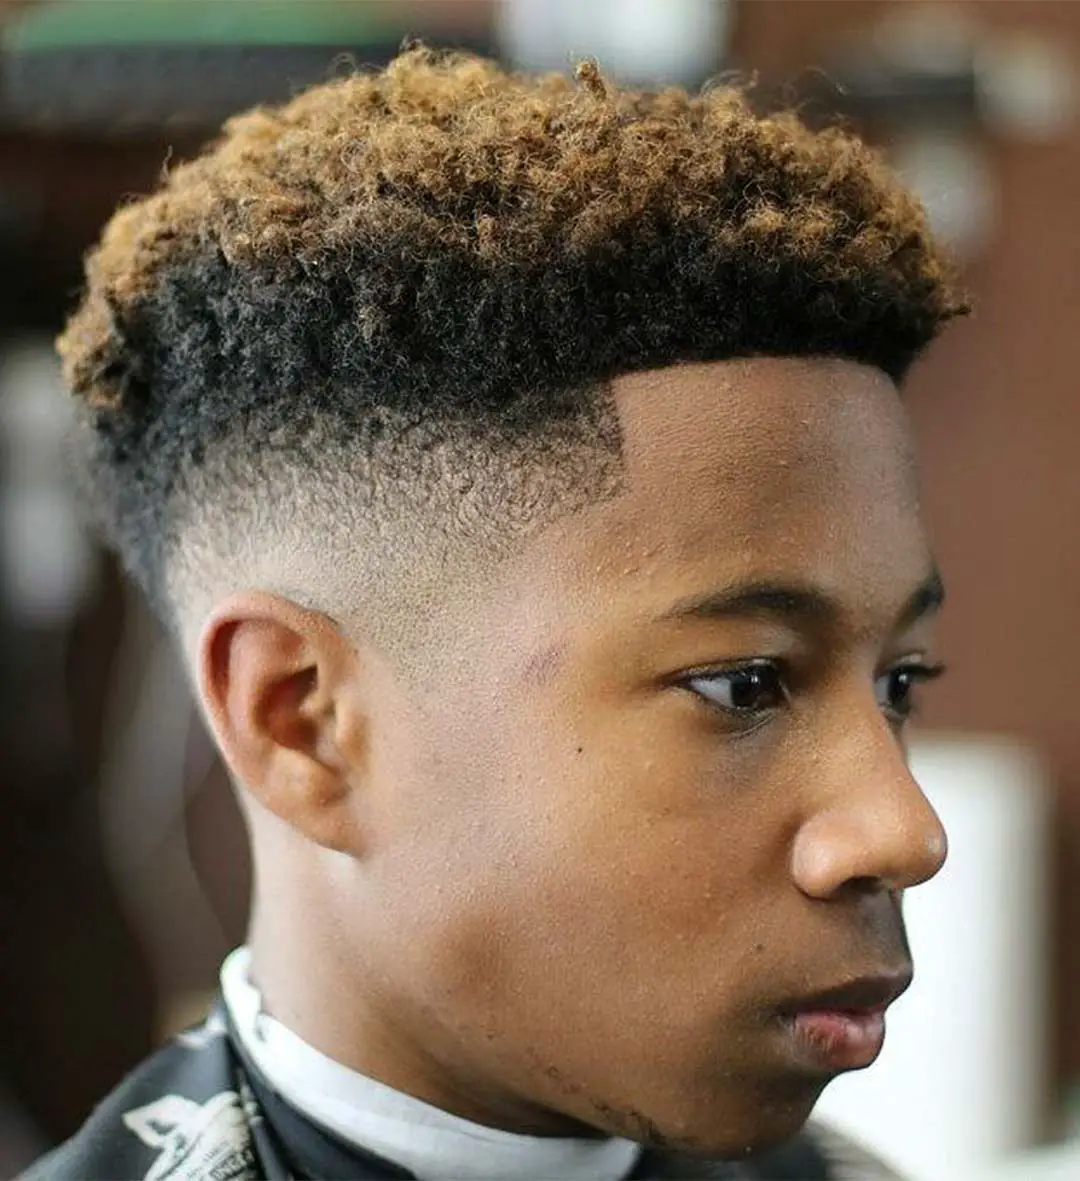 5 Trendy Boys Haircuts and Which One You Should Choose for Your Child -  Judes Barbershop